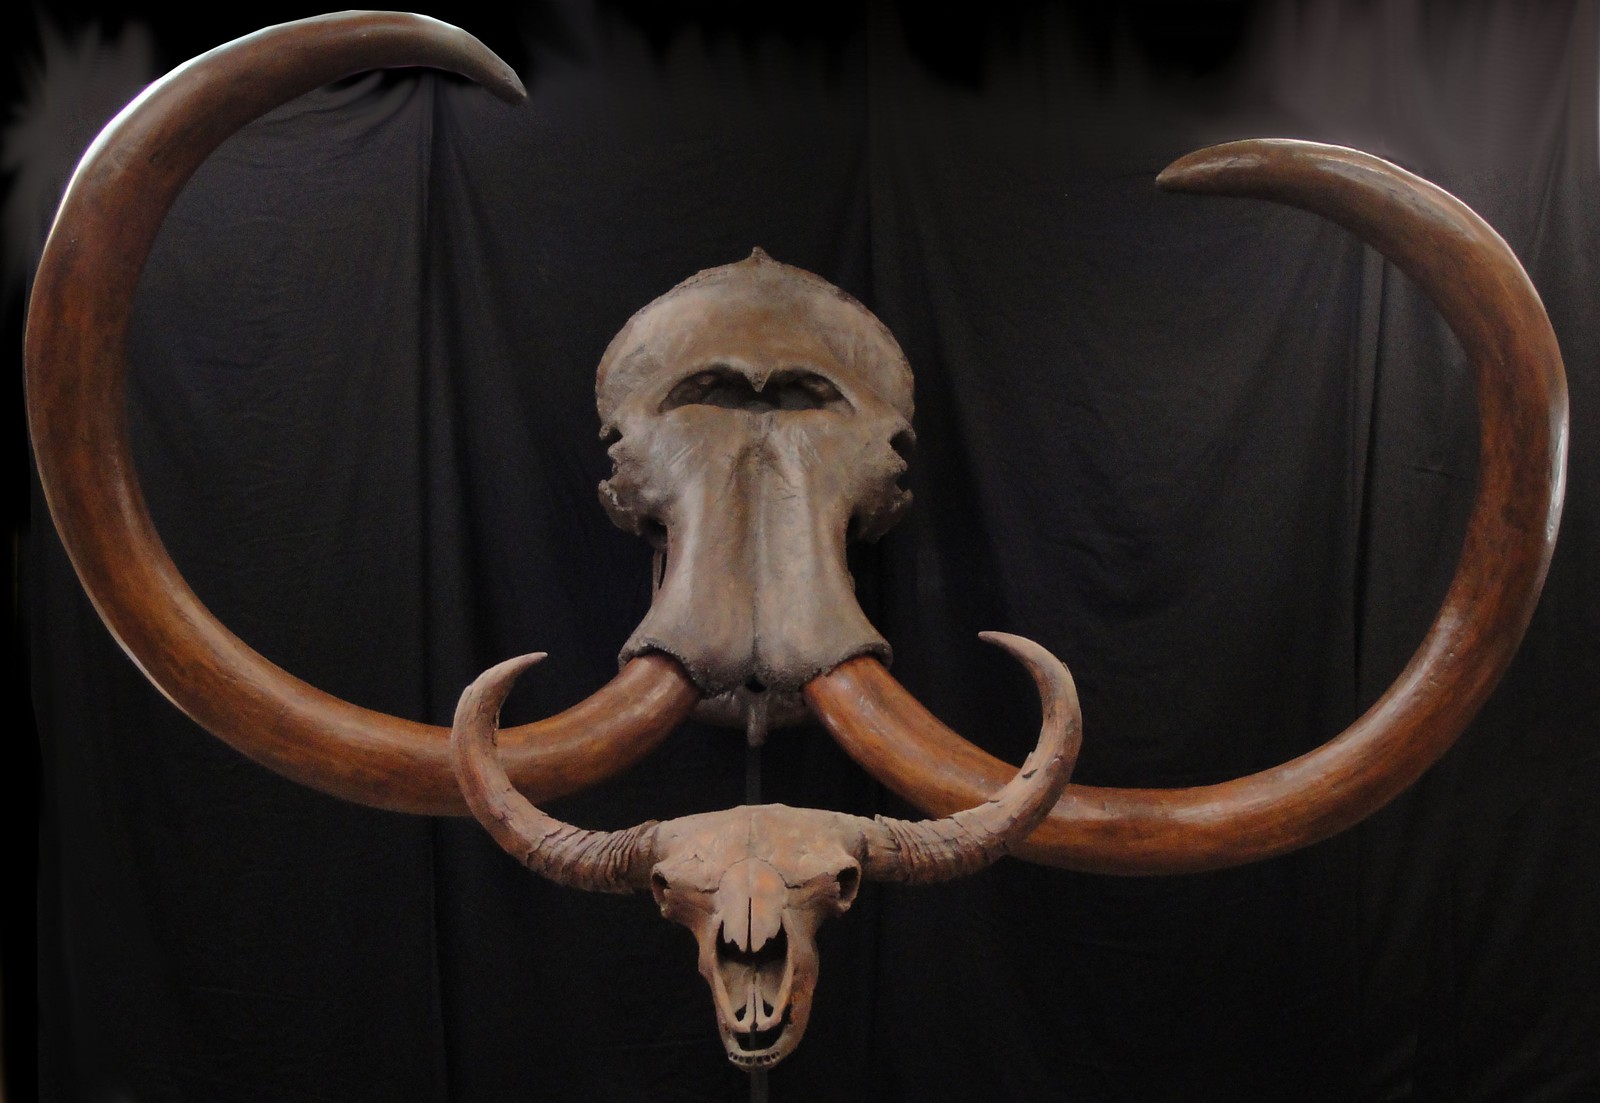 Horned and tusked animal skulls are displayed in the "Horns & Tusks" exhibit.